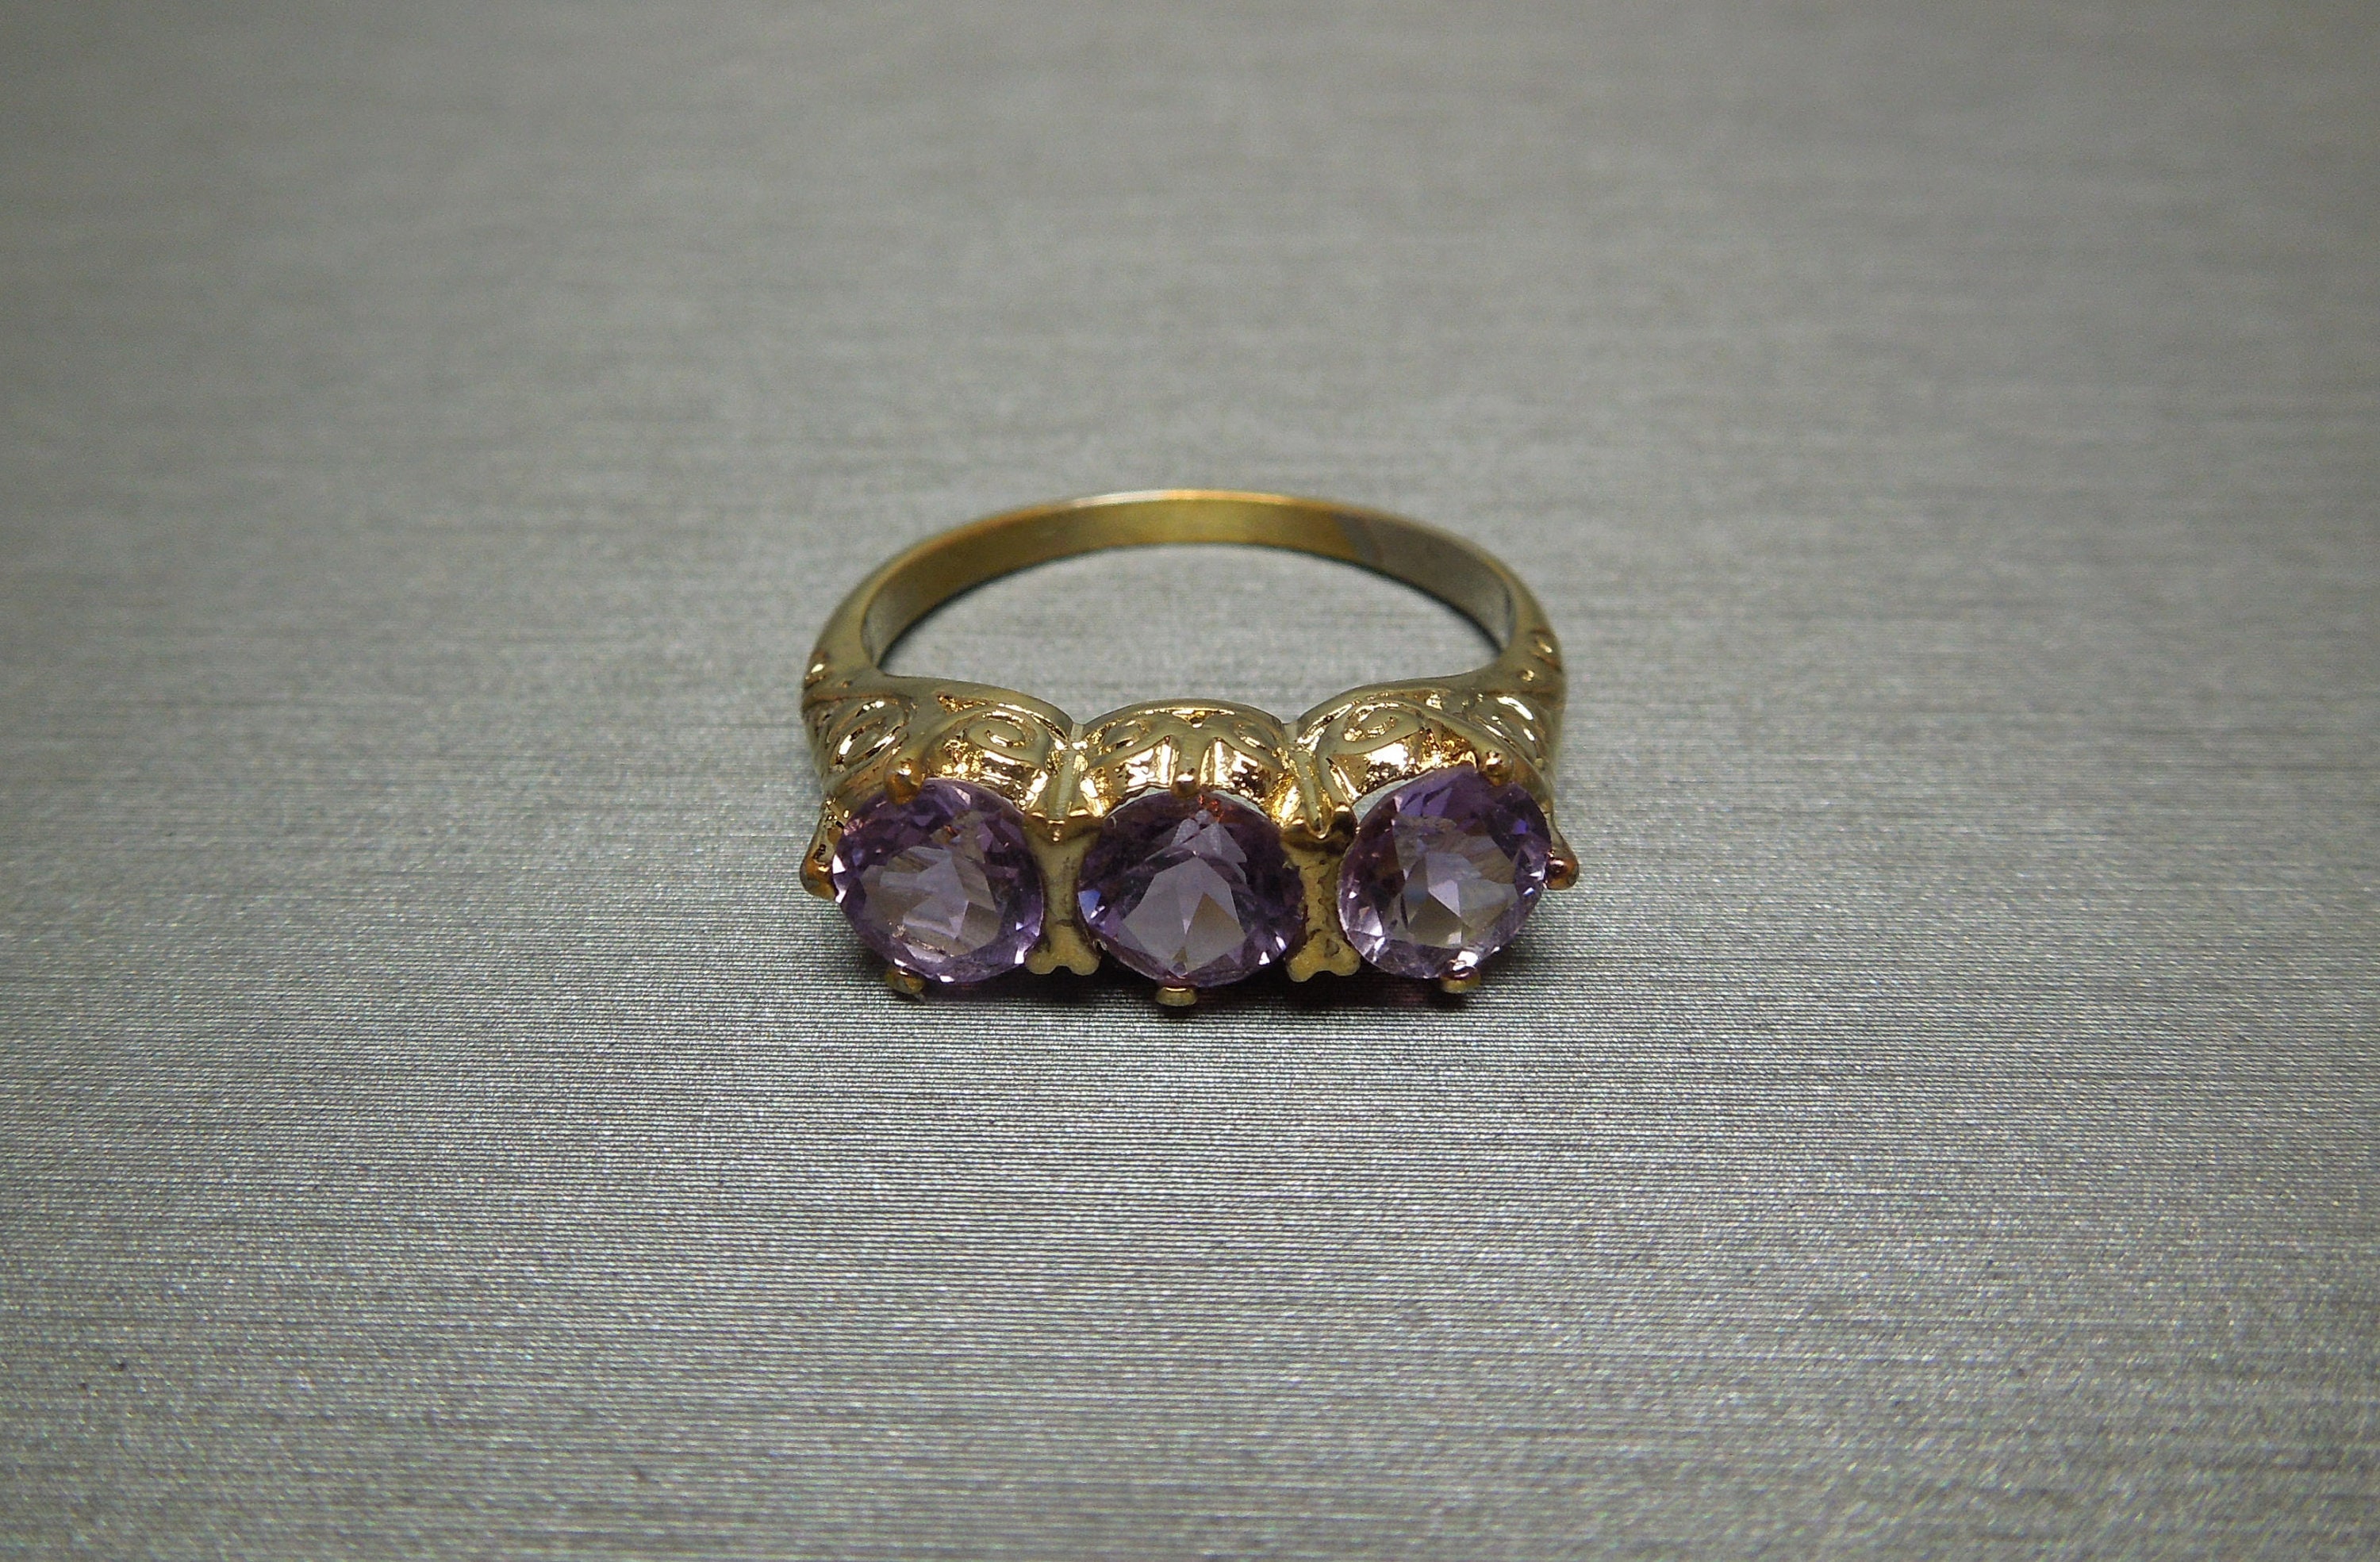 Amethyst Color Faceted Purple Cubic Zirconia Ring 925 Sterling Silver 24K Yellow Gold Vermeil Handcrafted Hammered Handmade Artisan Ring 